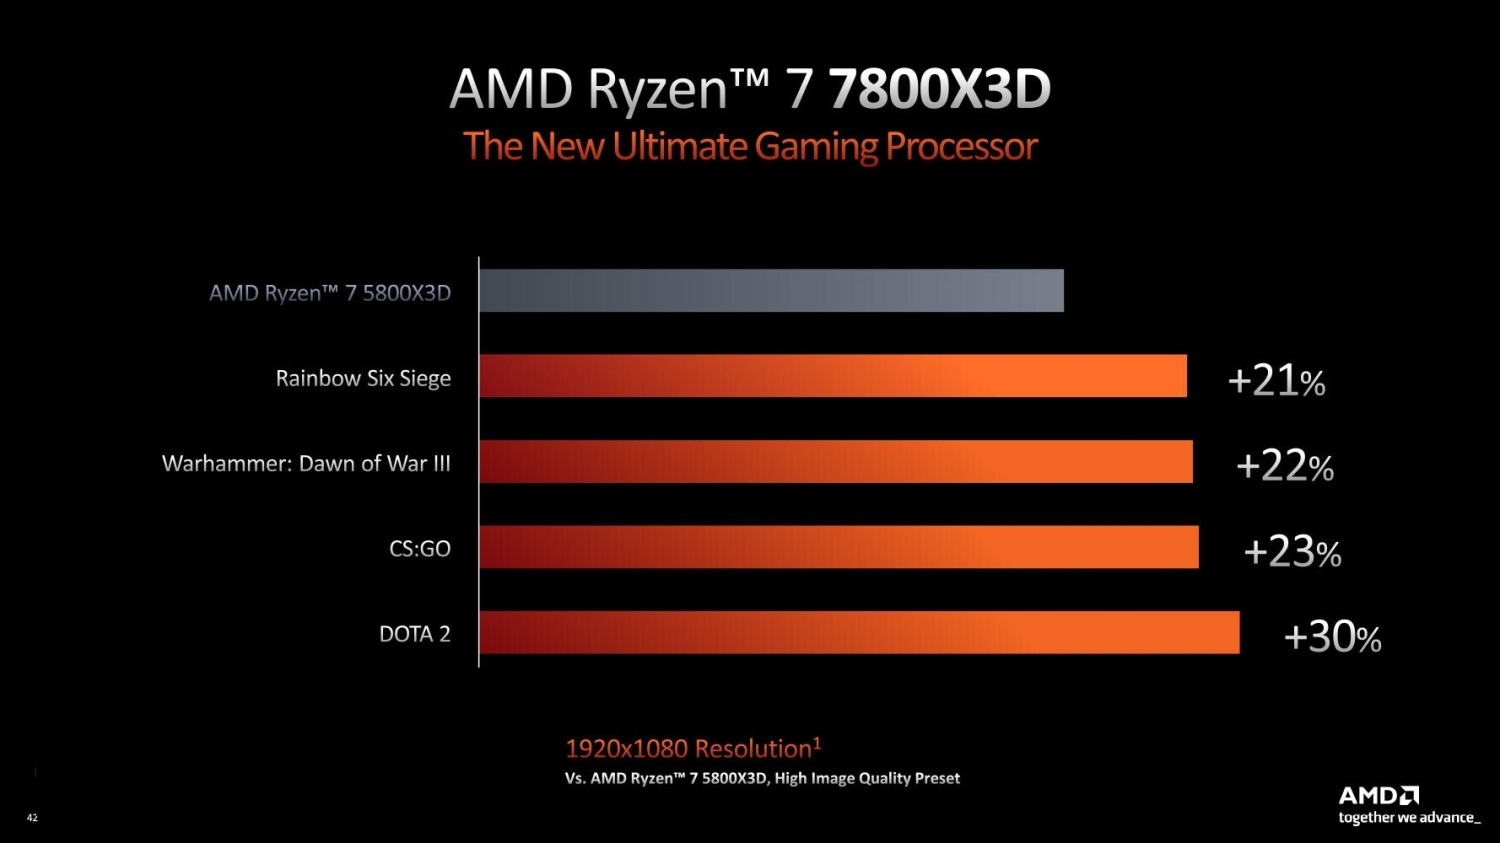 90208_02_amd-ryzen-7000x3d-cpus-launching-february-28-with-pricing-revealed-7950x3d-699_full